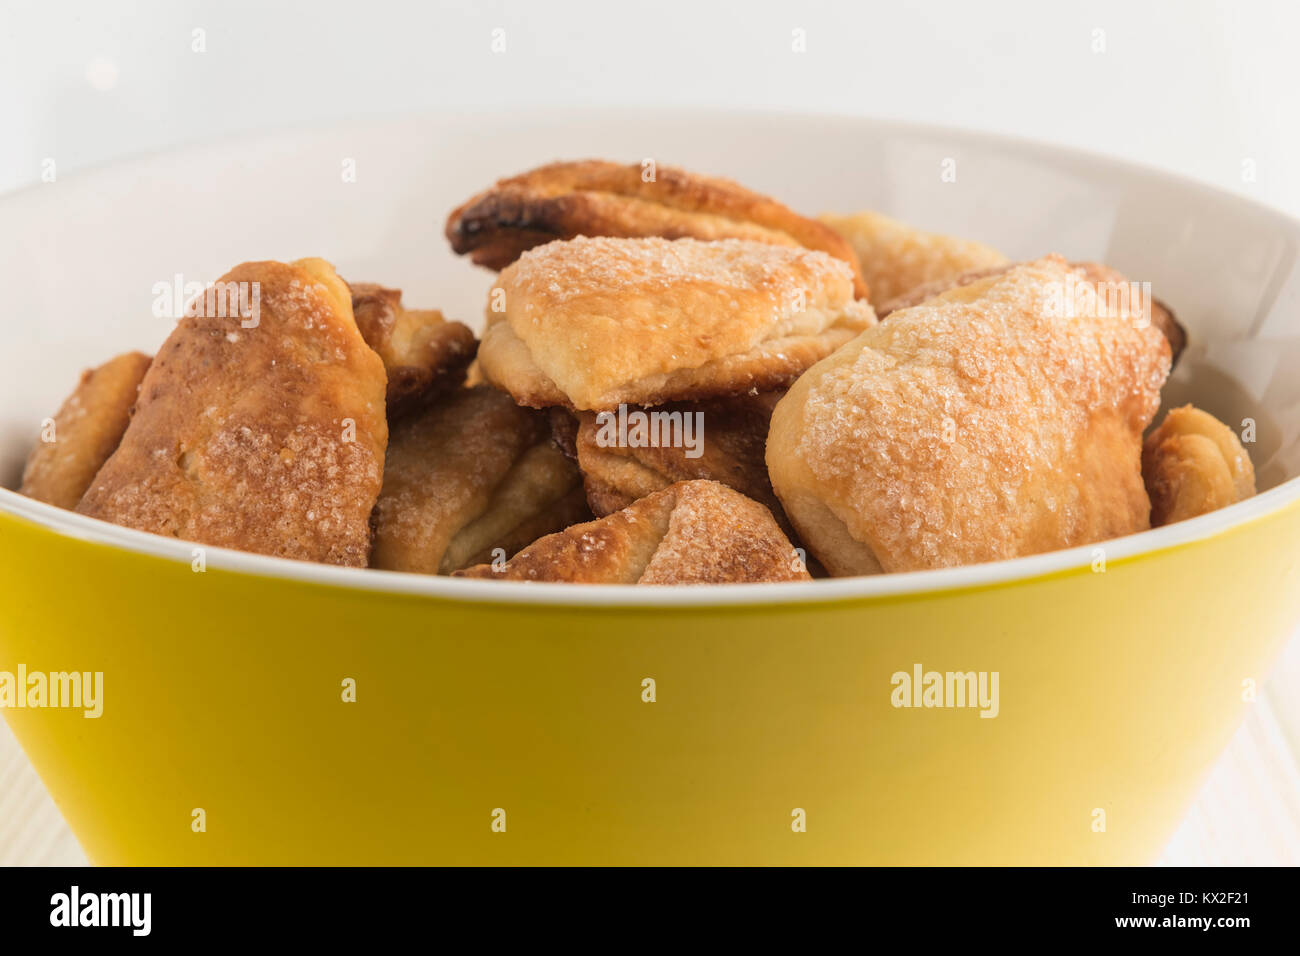 Home baked goods from cottage cheese. Stock Photo